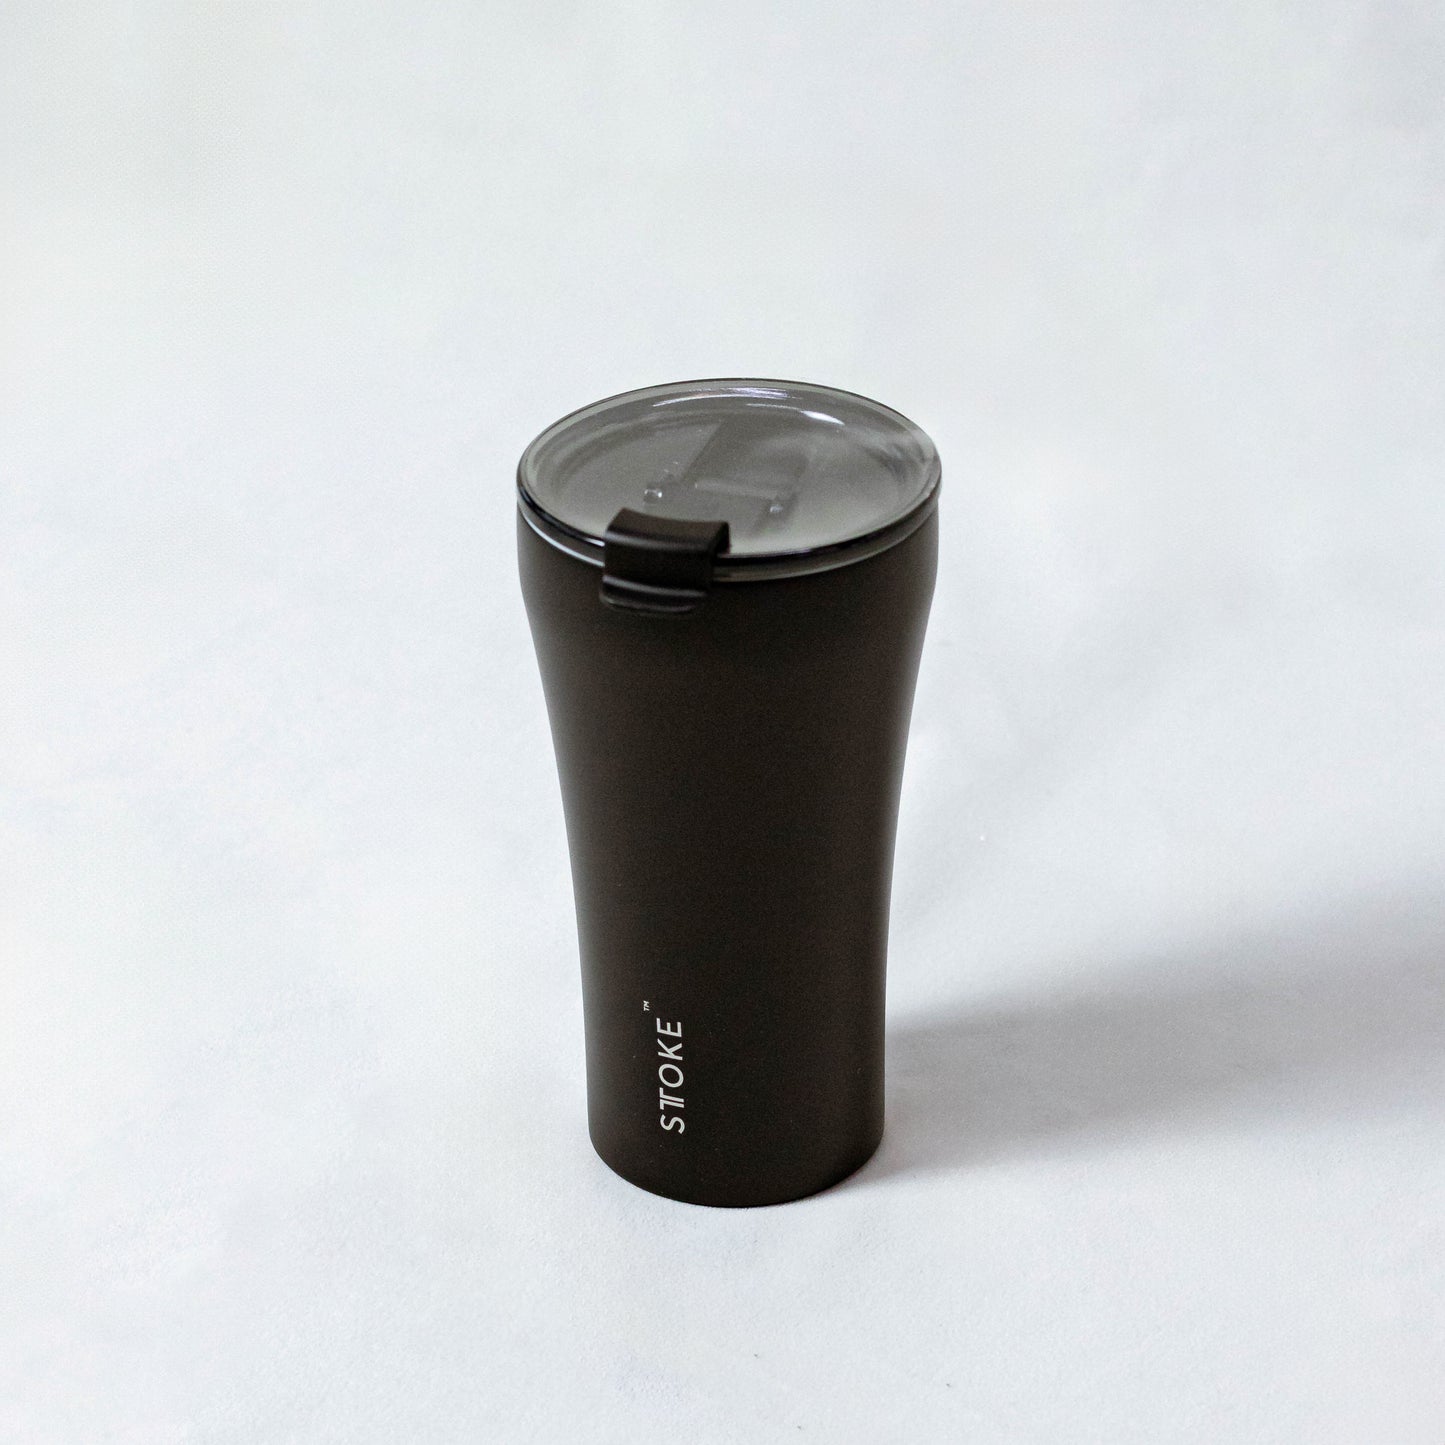 NEW! Customised Sttoke Insulated Ceramic Cup (Shatterproof) - Luxe Black (12 oz)